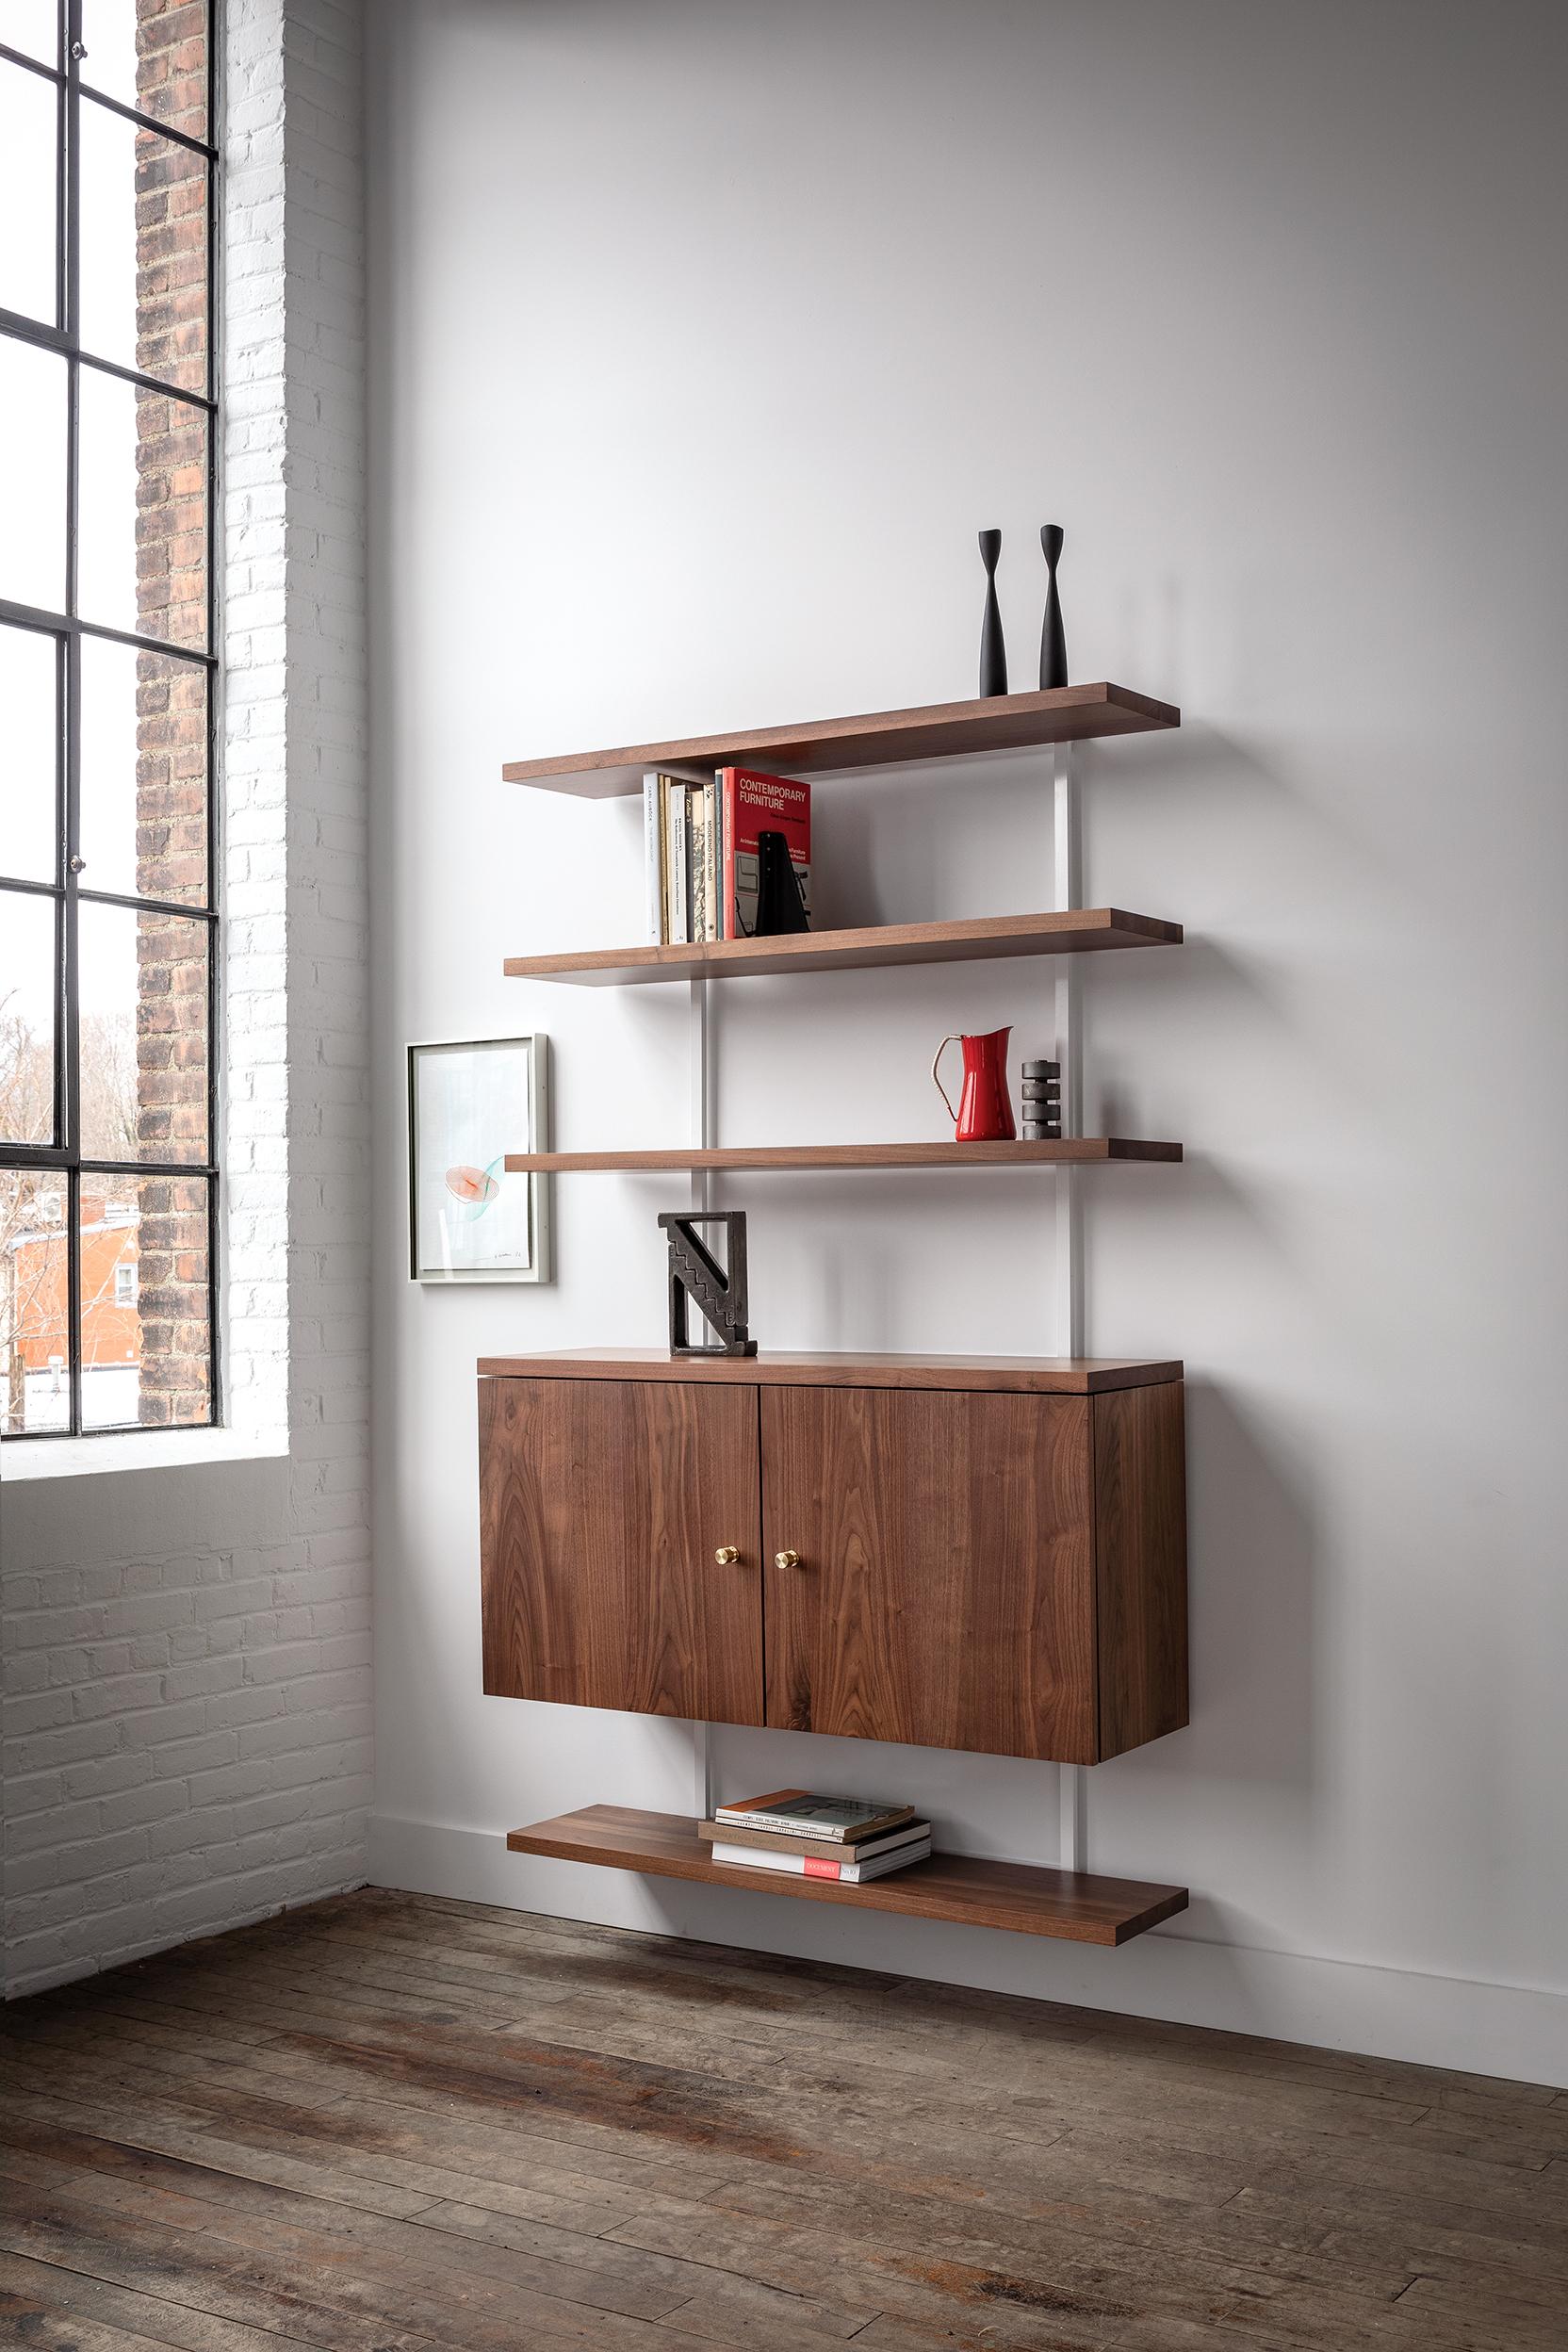 More than just a shelving system, the AS6 wall unit is a design tool for creating wall mounted furniture distilled to the essentials of line, plane and form. We encourage the unconstrained combination and configuration of these elements to elegantly